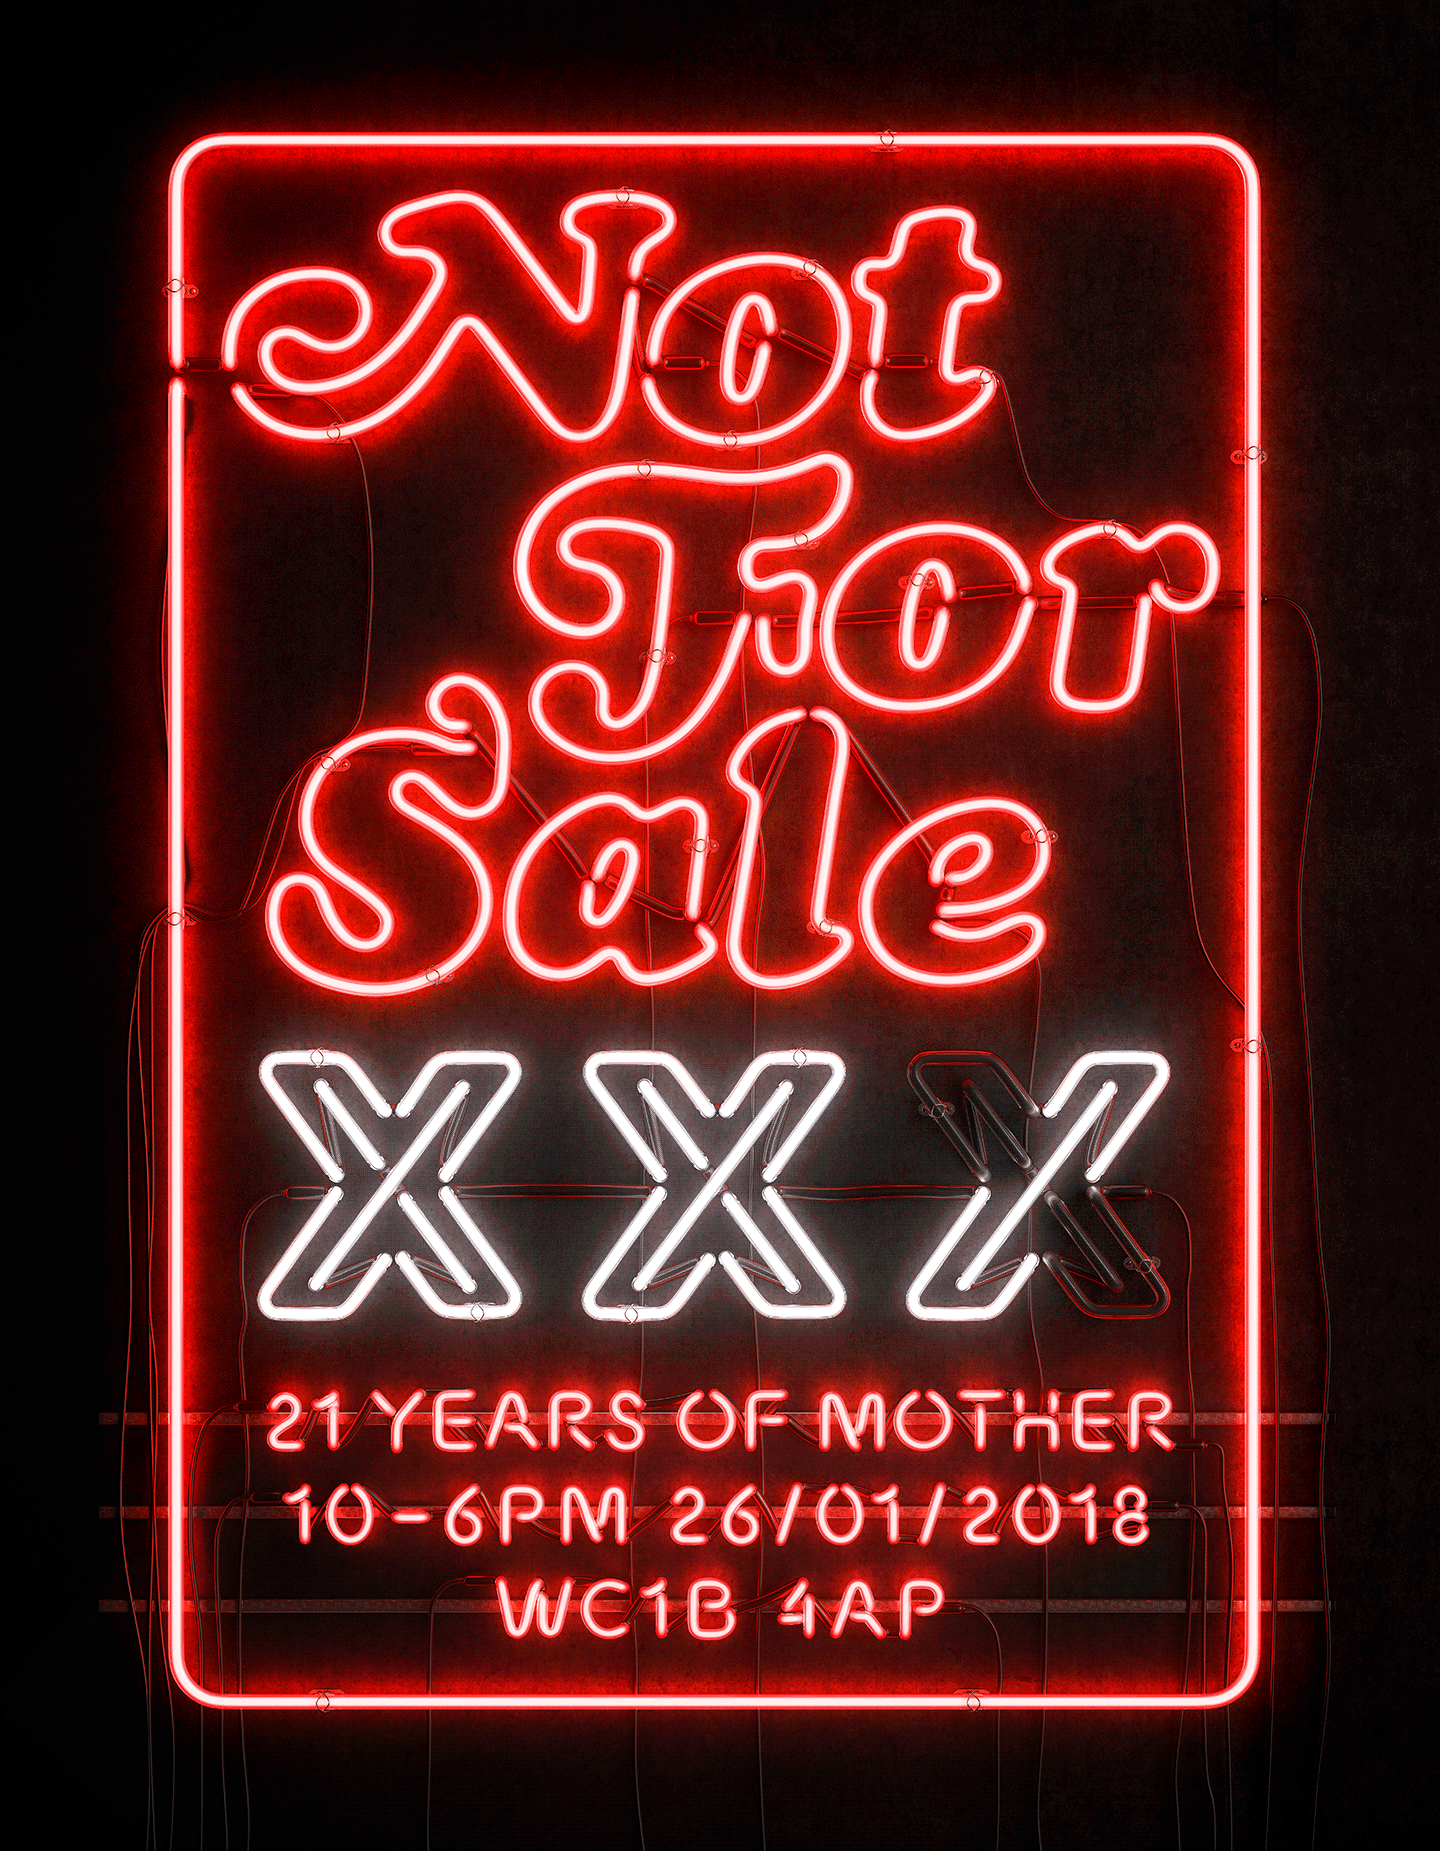 Advertising agency Mother is opening the doors to a retrospective of its most impactful non-commercial work from the past 21 years.